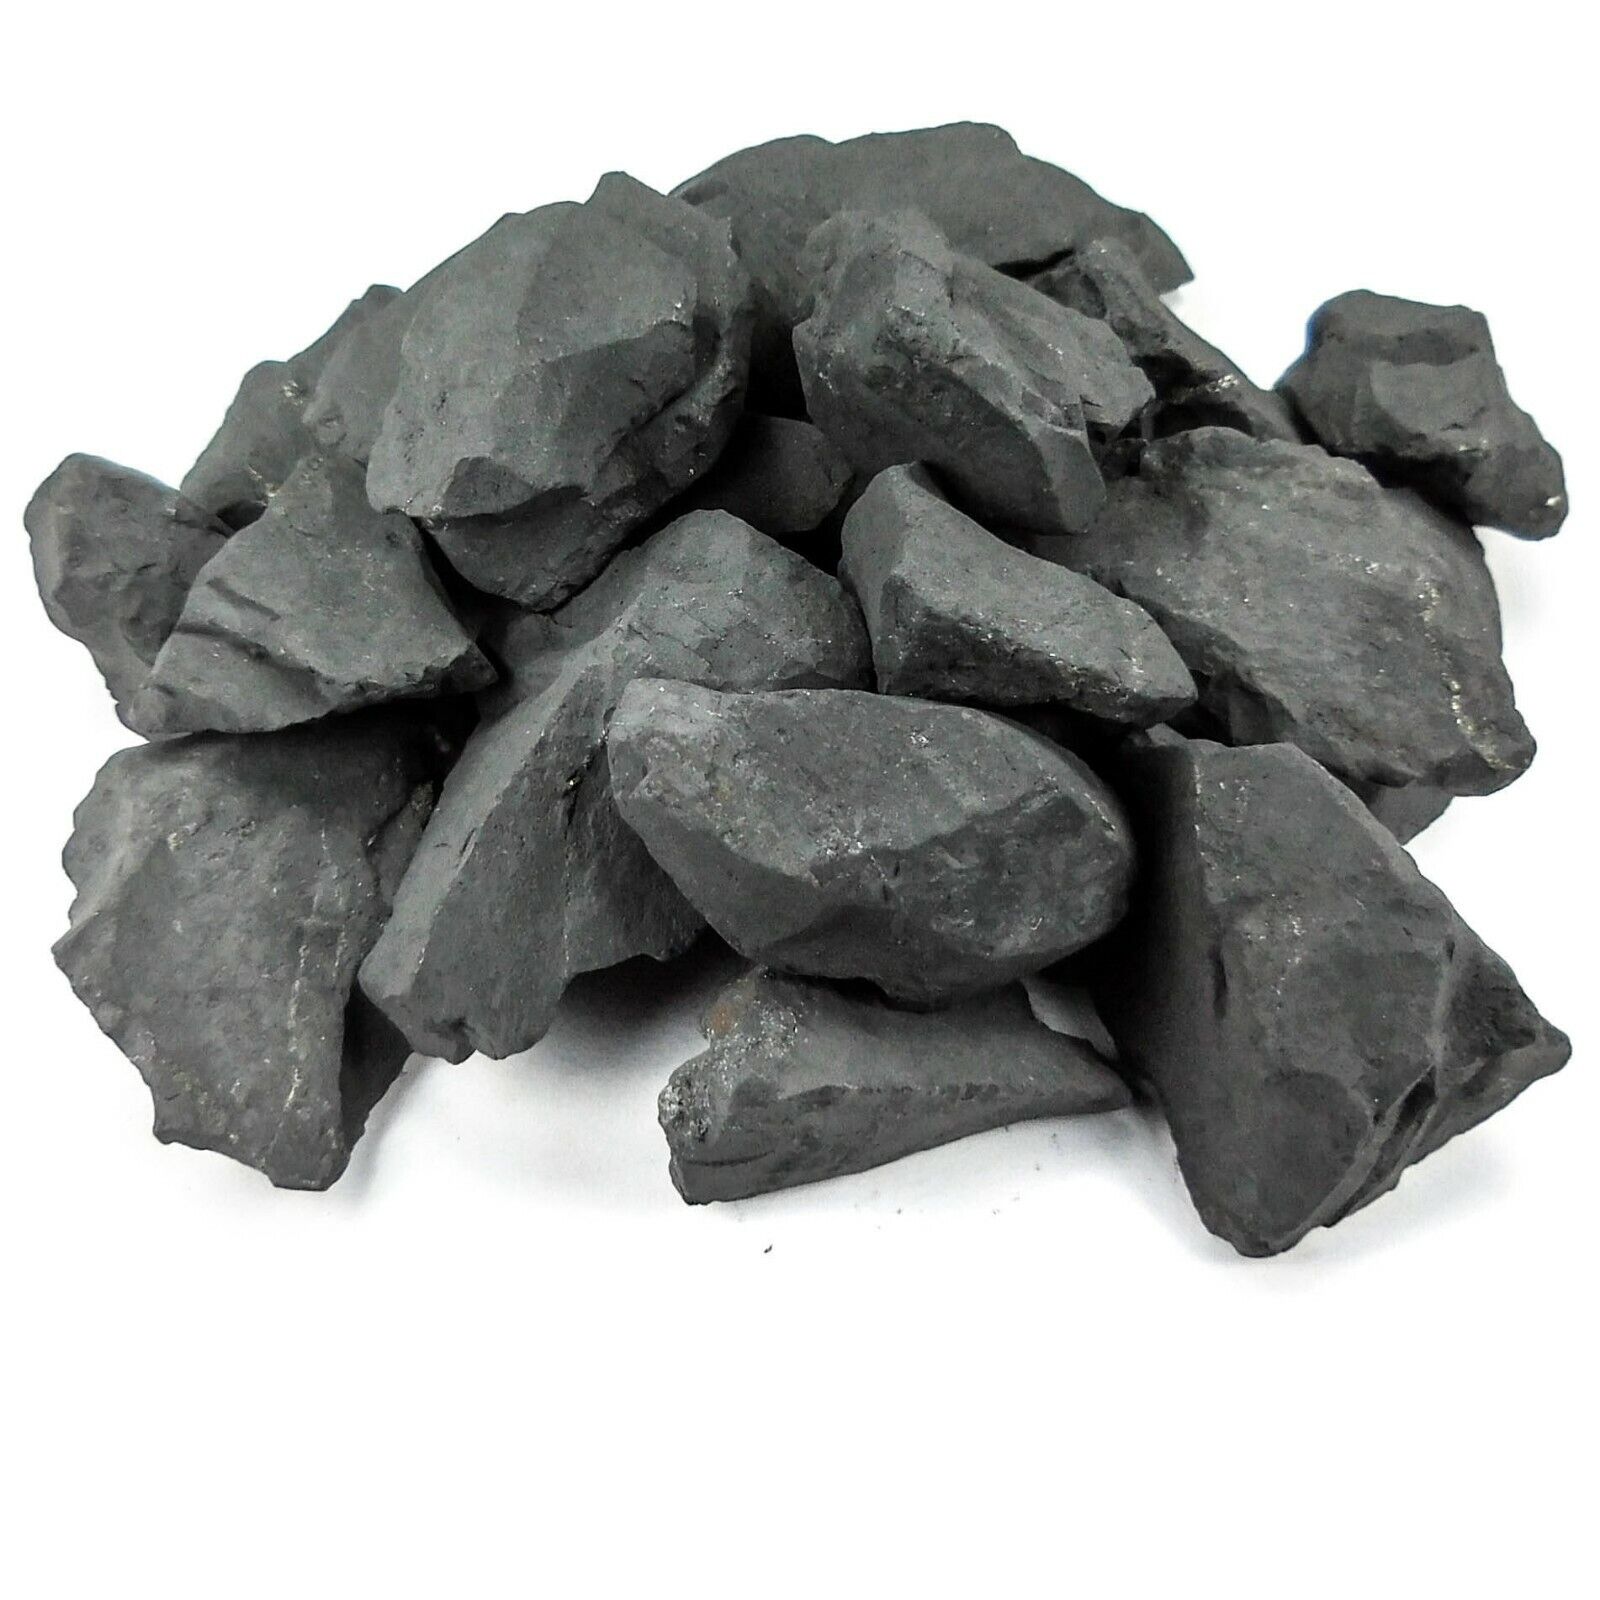 SHUNGITE Stones 6 LBs Natural Raw Rocks Big 2-3 inch Fraction Authentic Mineral